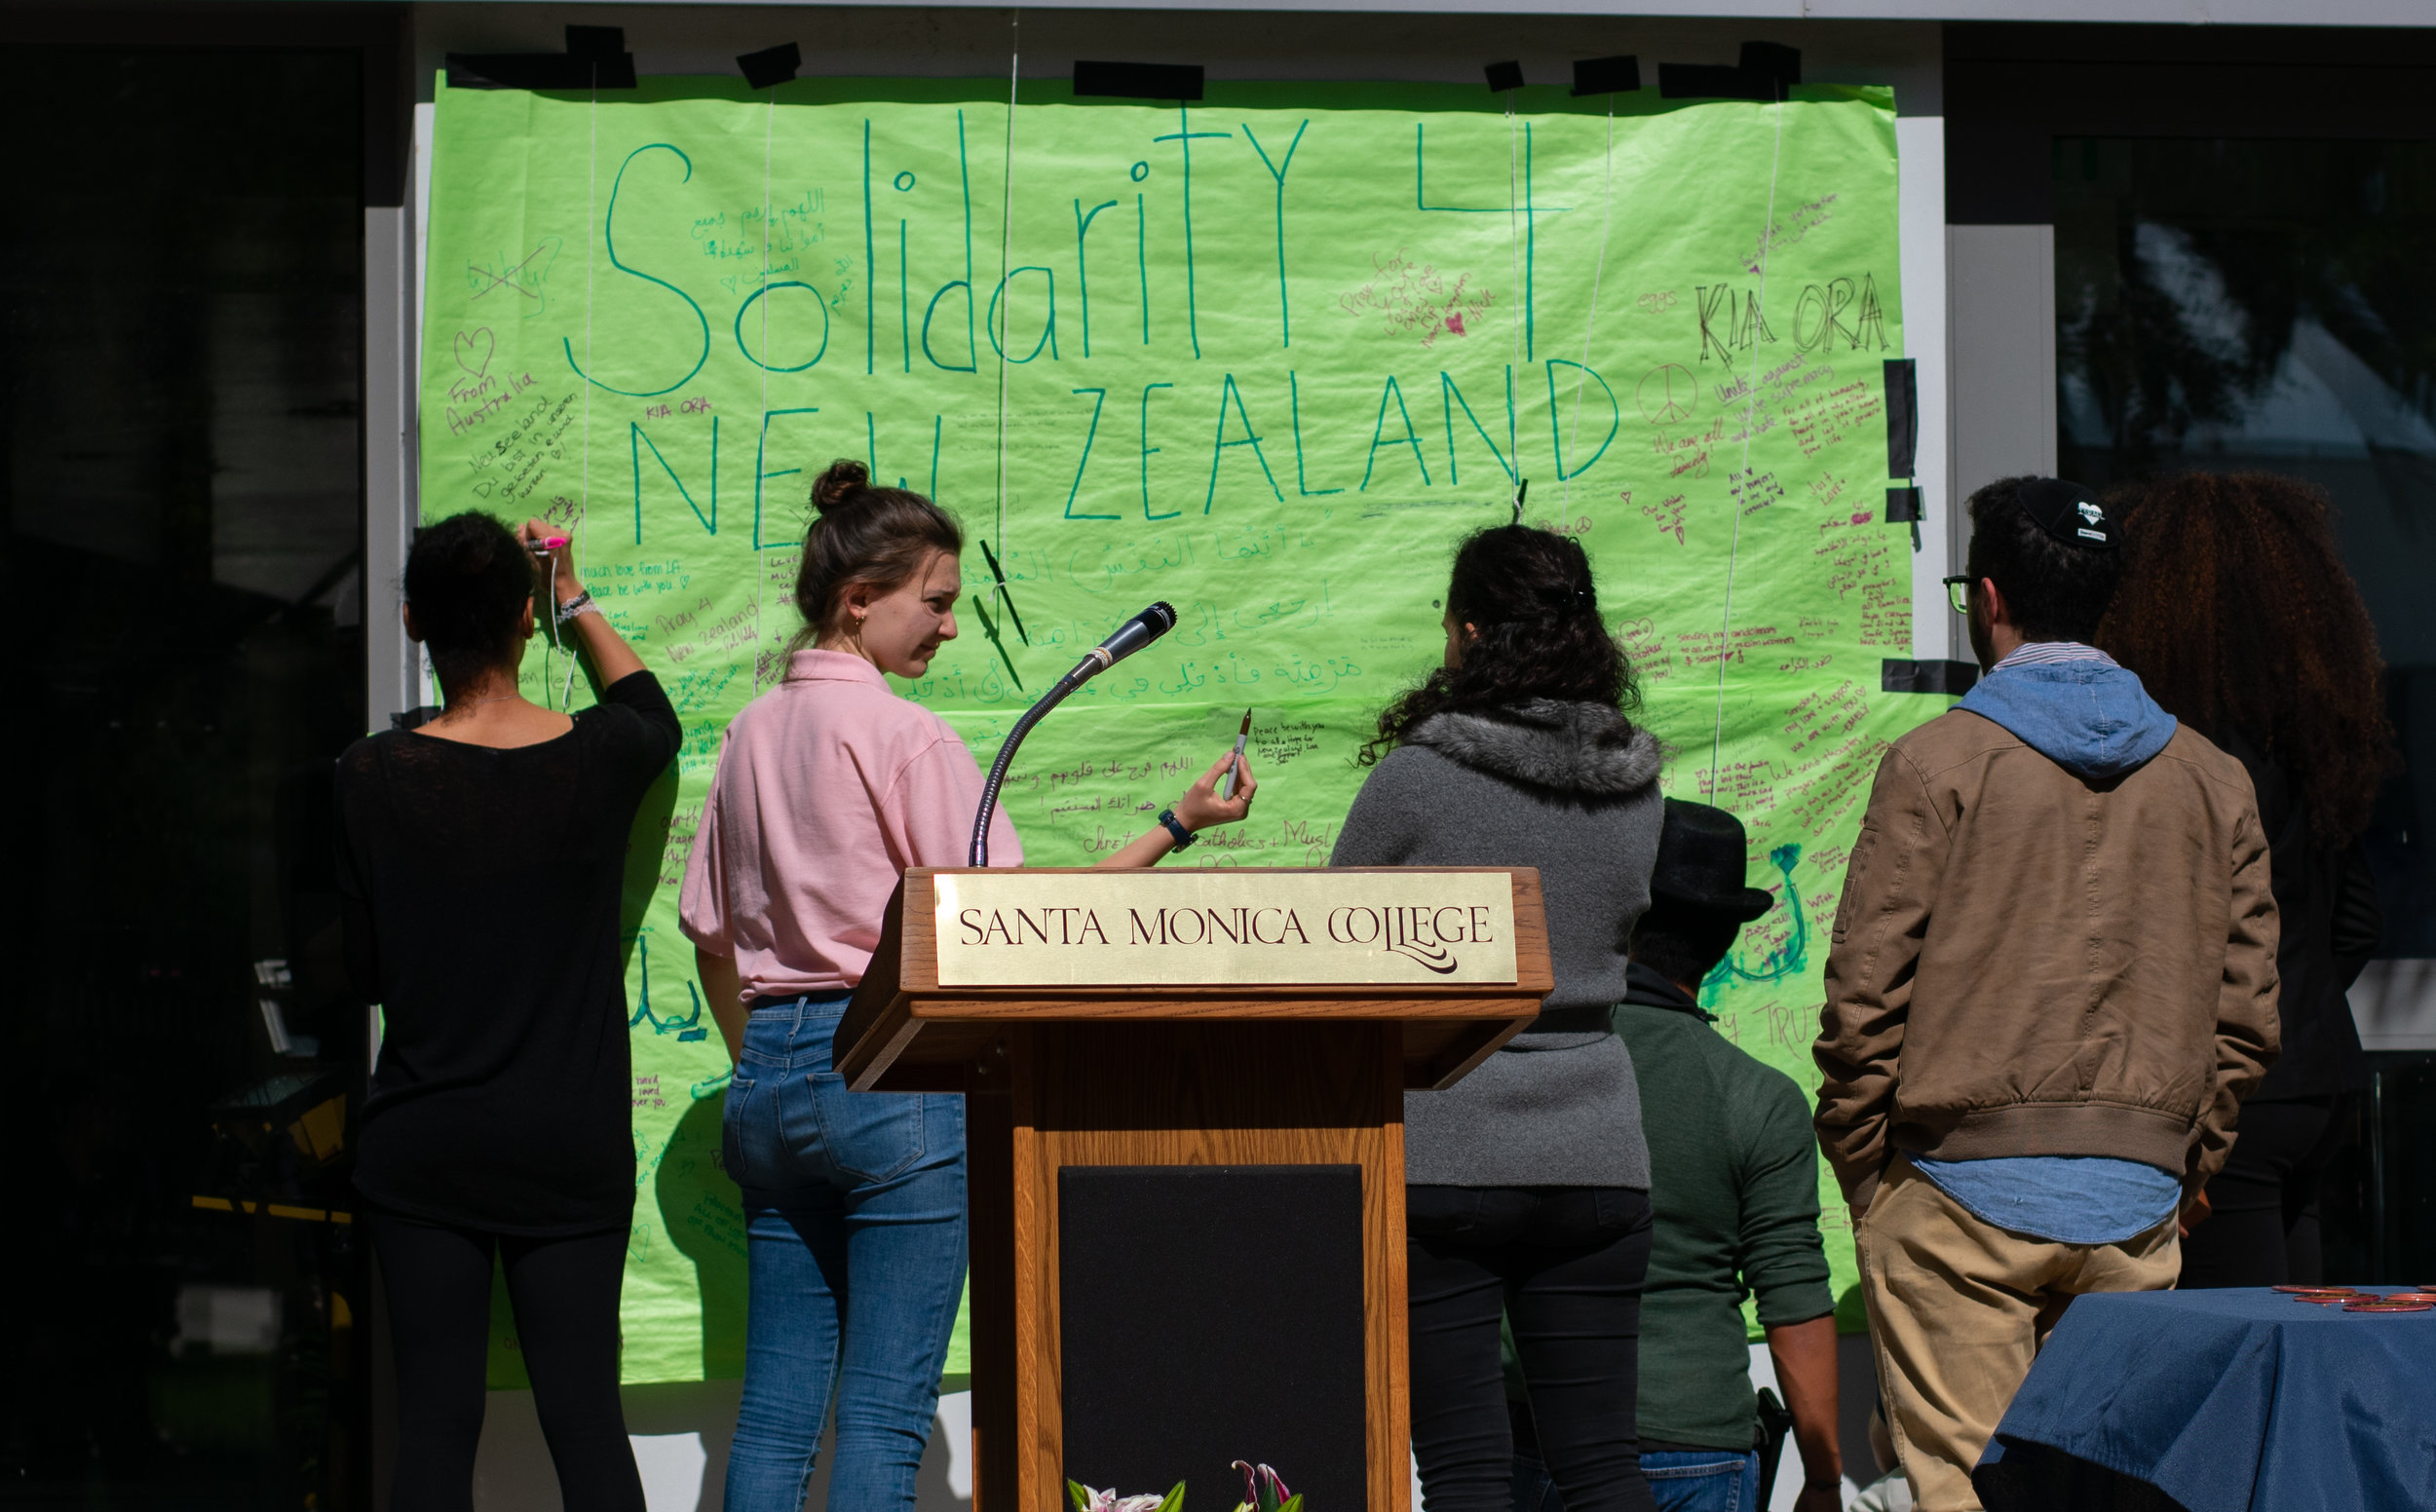  Students write messages to those in New Zealand  on a poster just before a vigil for the victims of the Christchurch shootings on Wednesday March 20th 2019 at Santa Monica College (SMC), Santa Monica Calif. (Photo by Conner Savage Corsair Staff) 